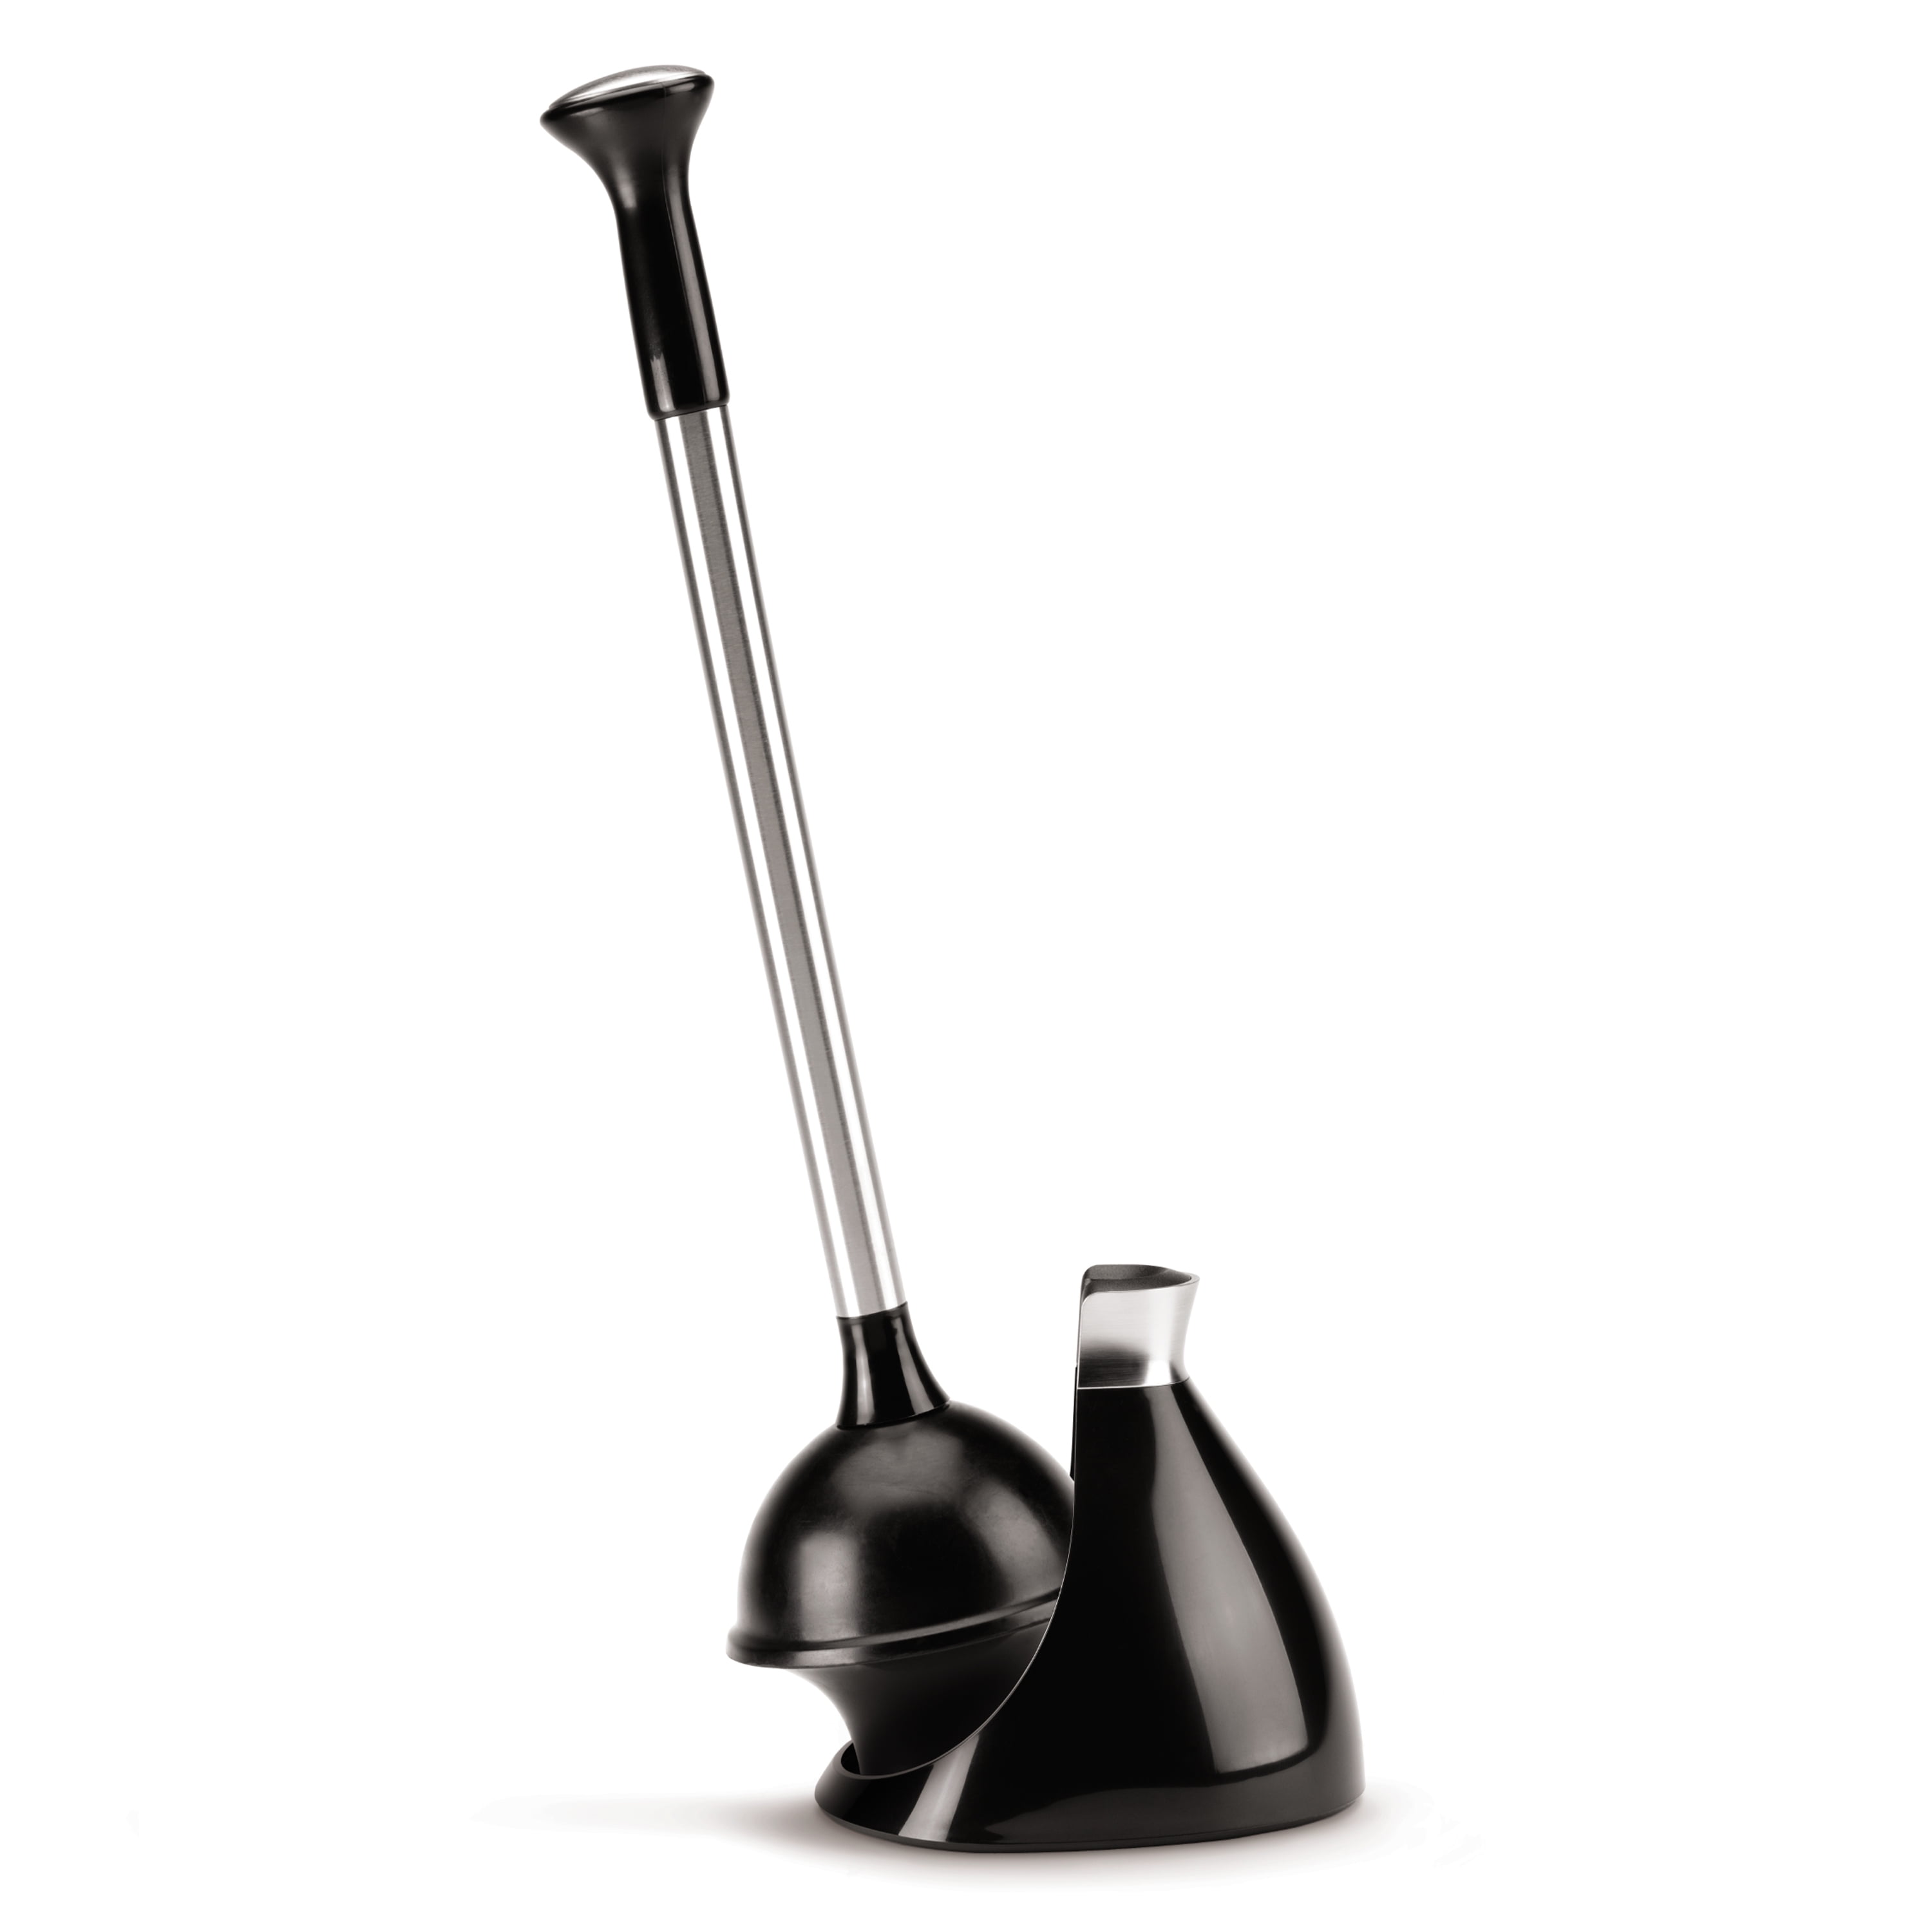  simplehuman Toilet Plunger and Caddy Stainless Steel, Black :  Home & Kitchen